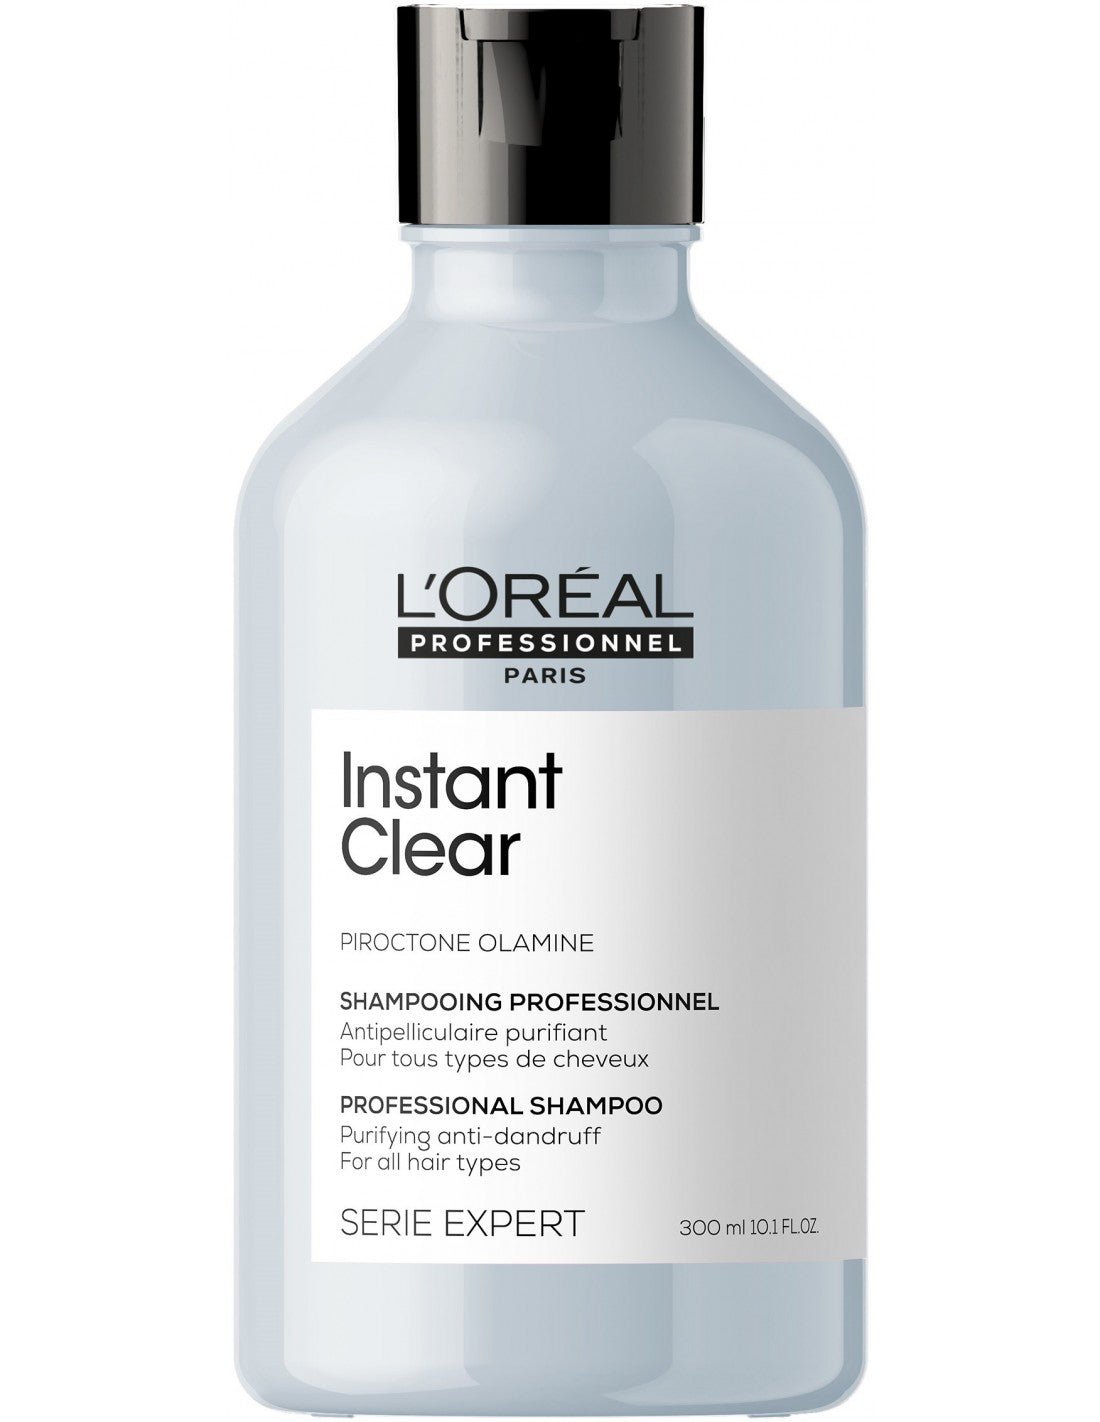 Loreal Professional Instant Clear Shampoo 30ML - AllurebeautypkLoreal Professional Instant Clear Shampoo 30ML